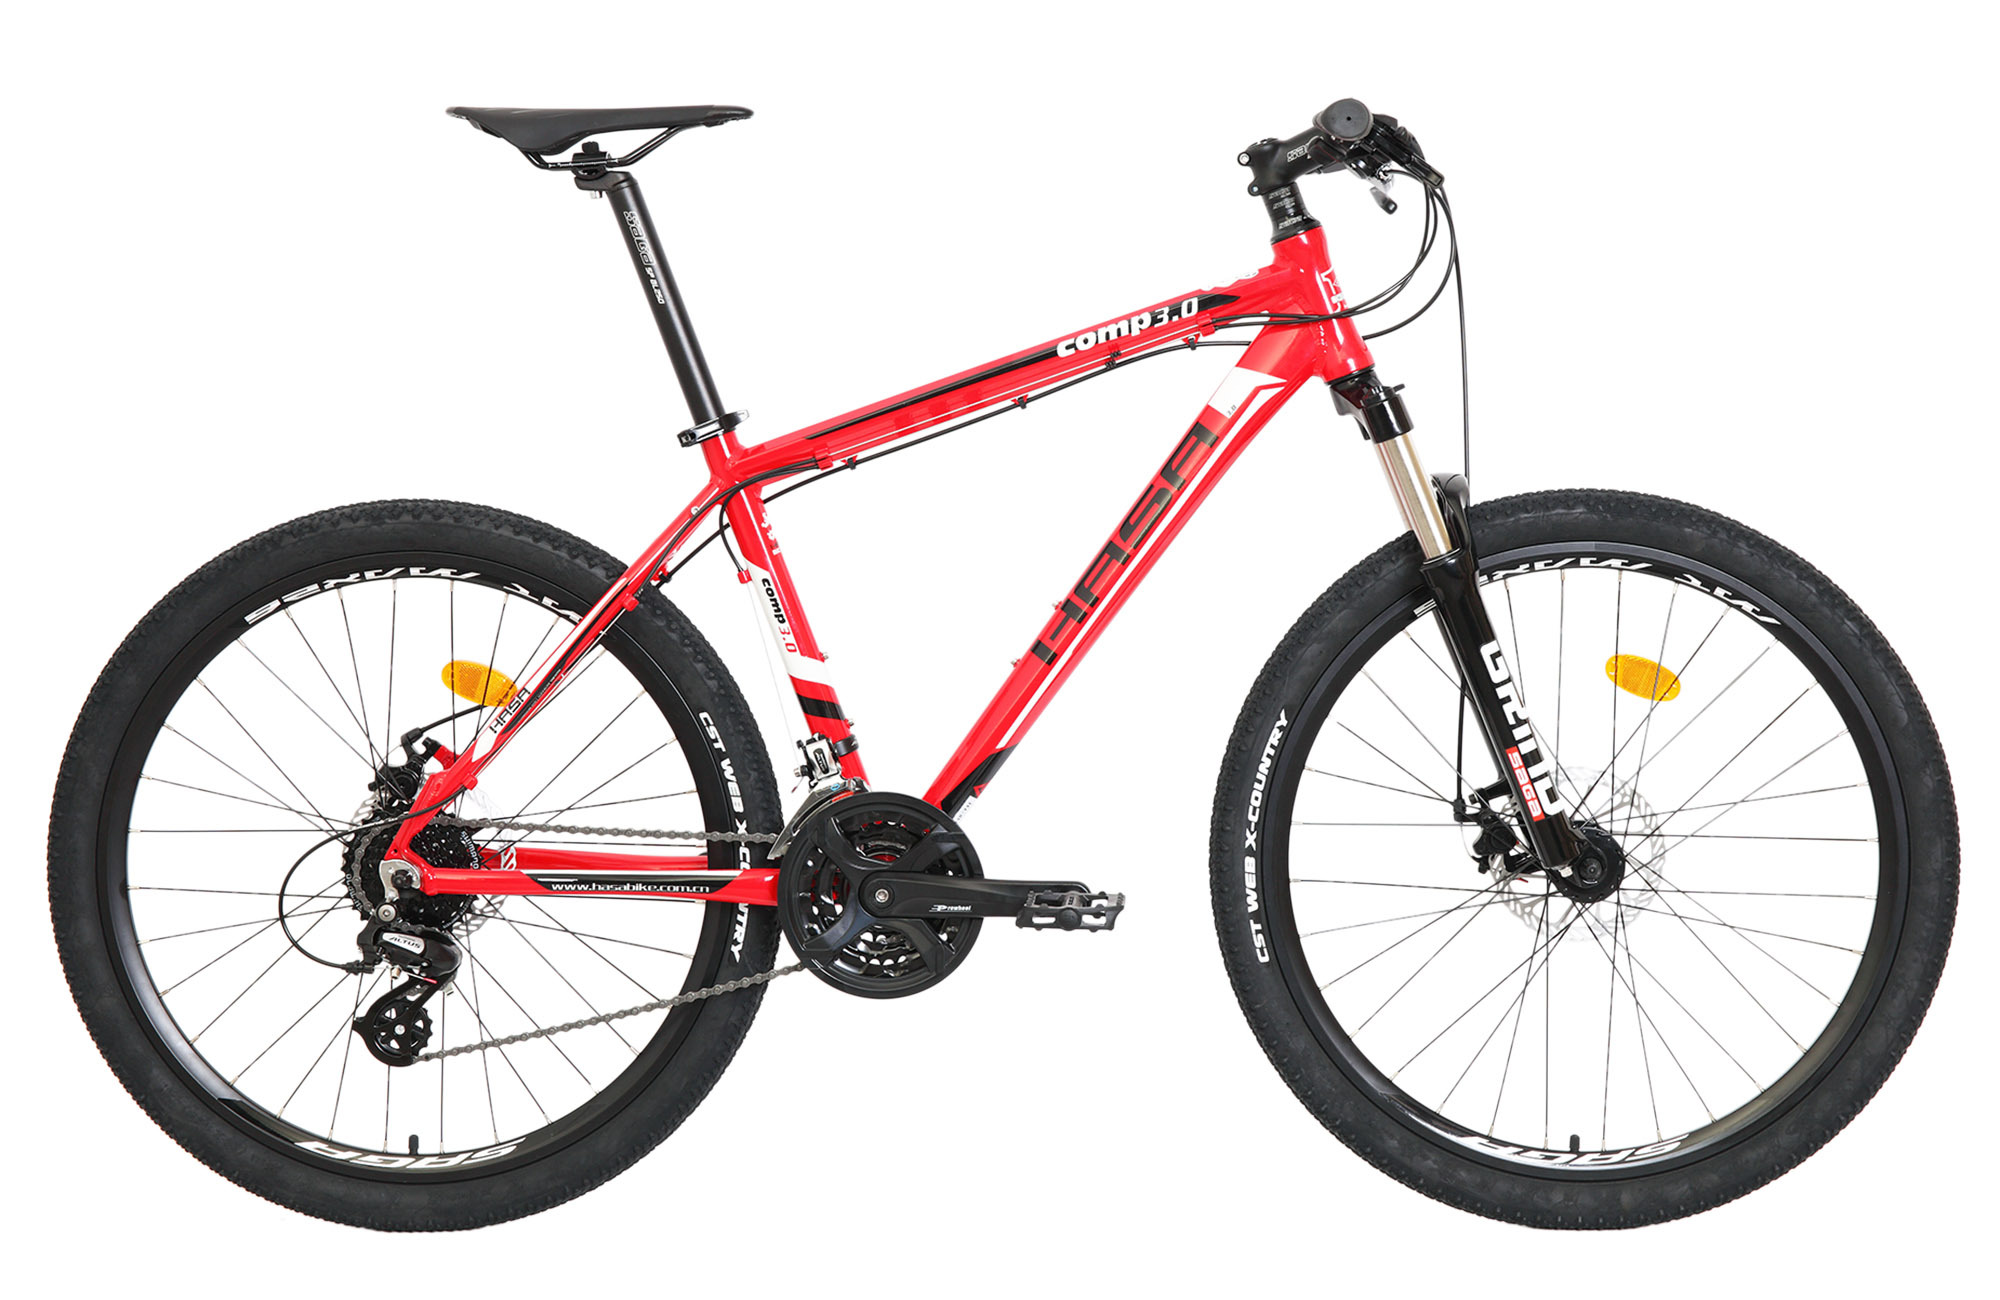 HASA COMP 3.0D Shimano 24 Speed Mountain Bike 26" - Frame Size 17.5" Red